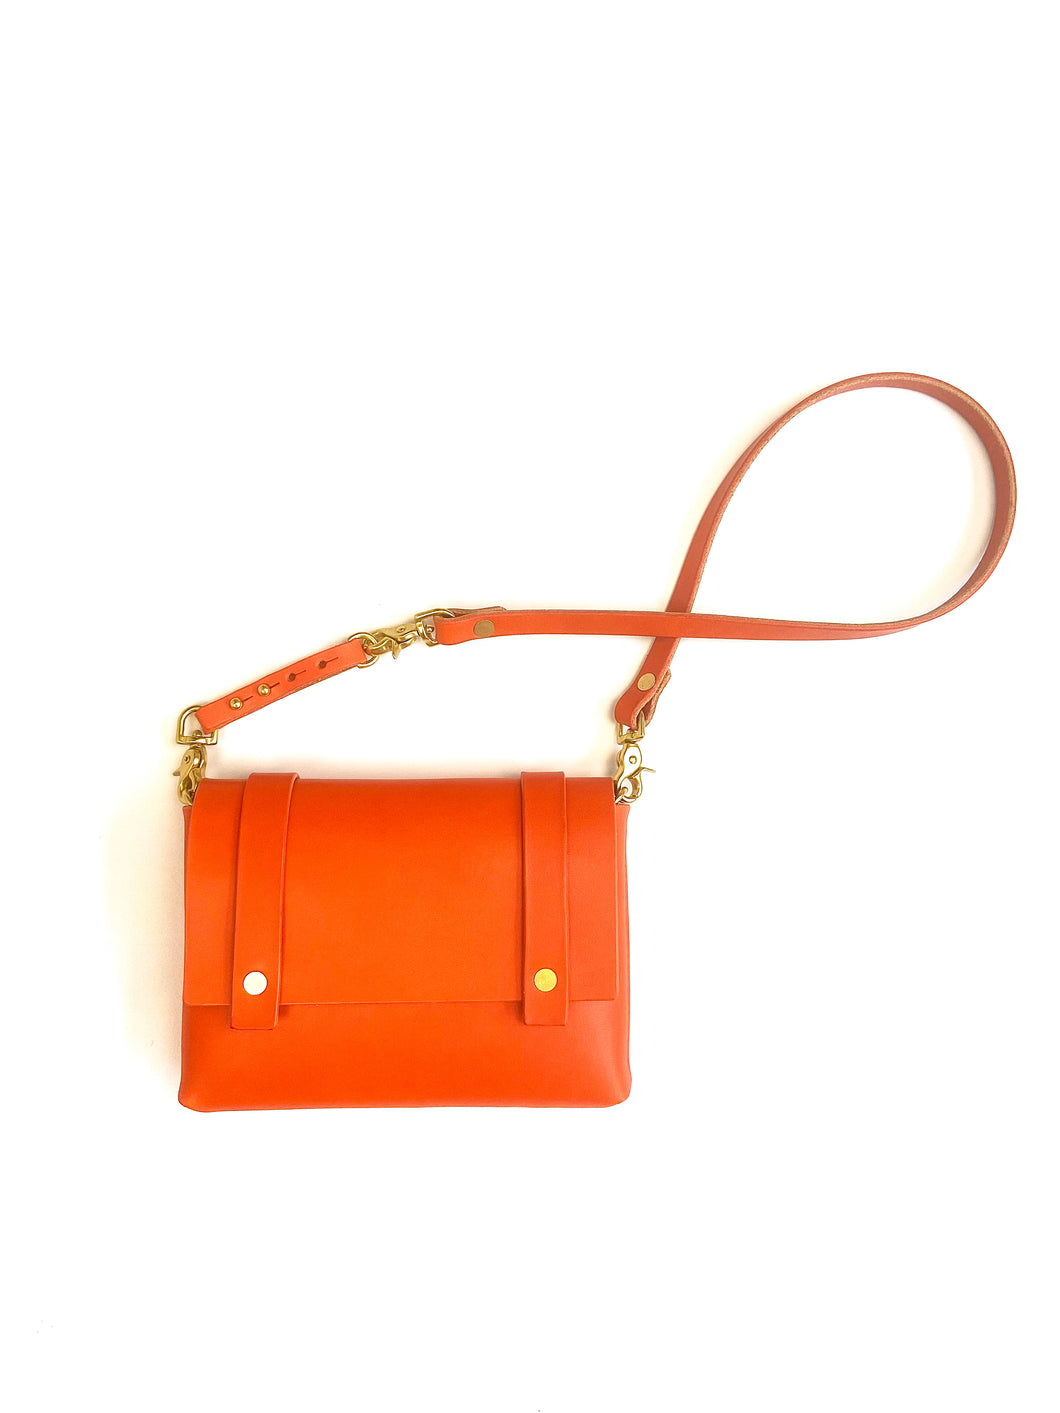 Iconic Orange Leather Mini Clutch with Sling Strap and Extender